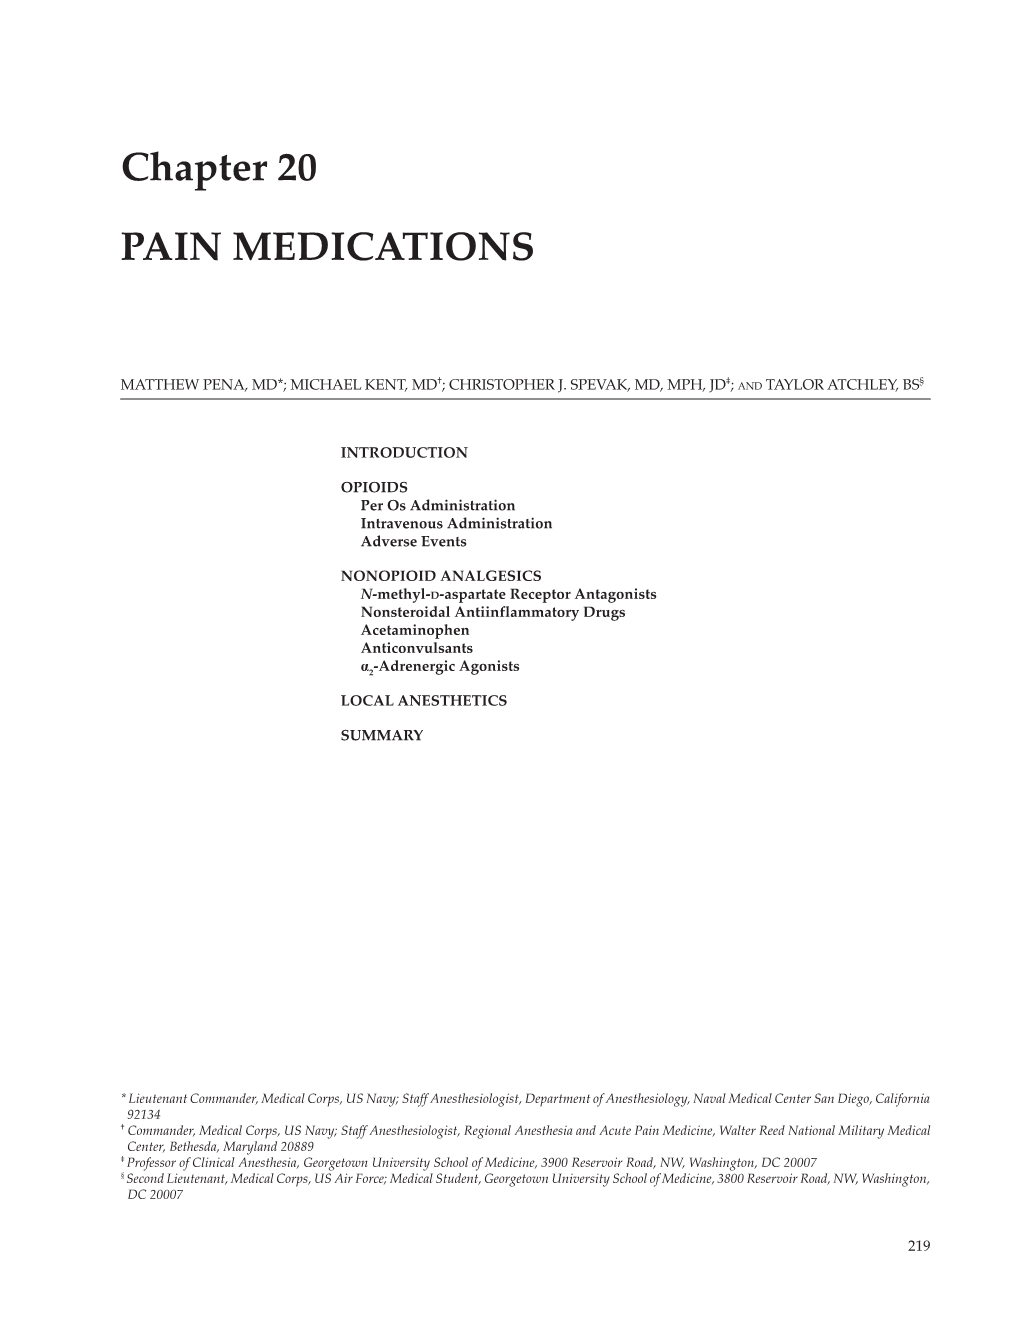 Chapter 20 PAIN MEDICATIONS